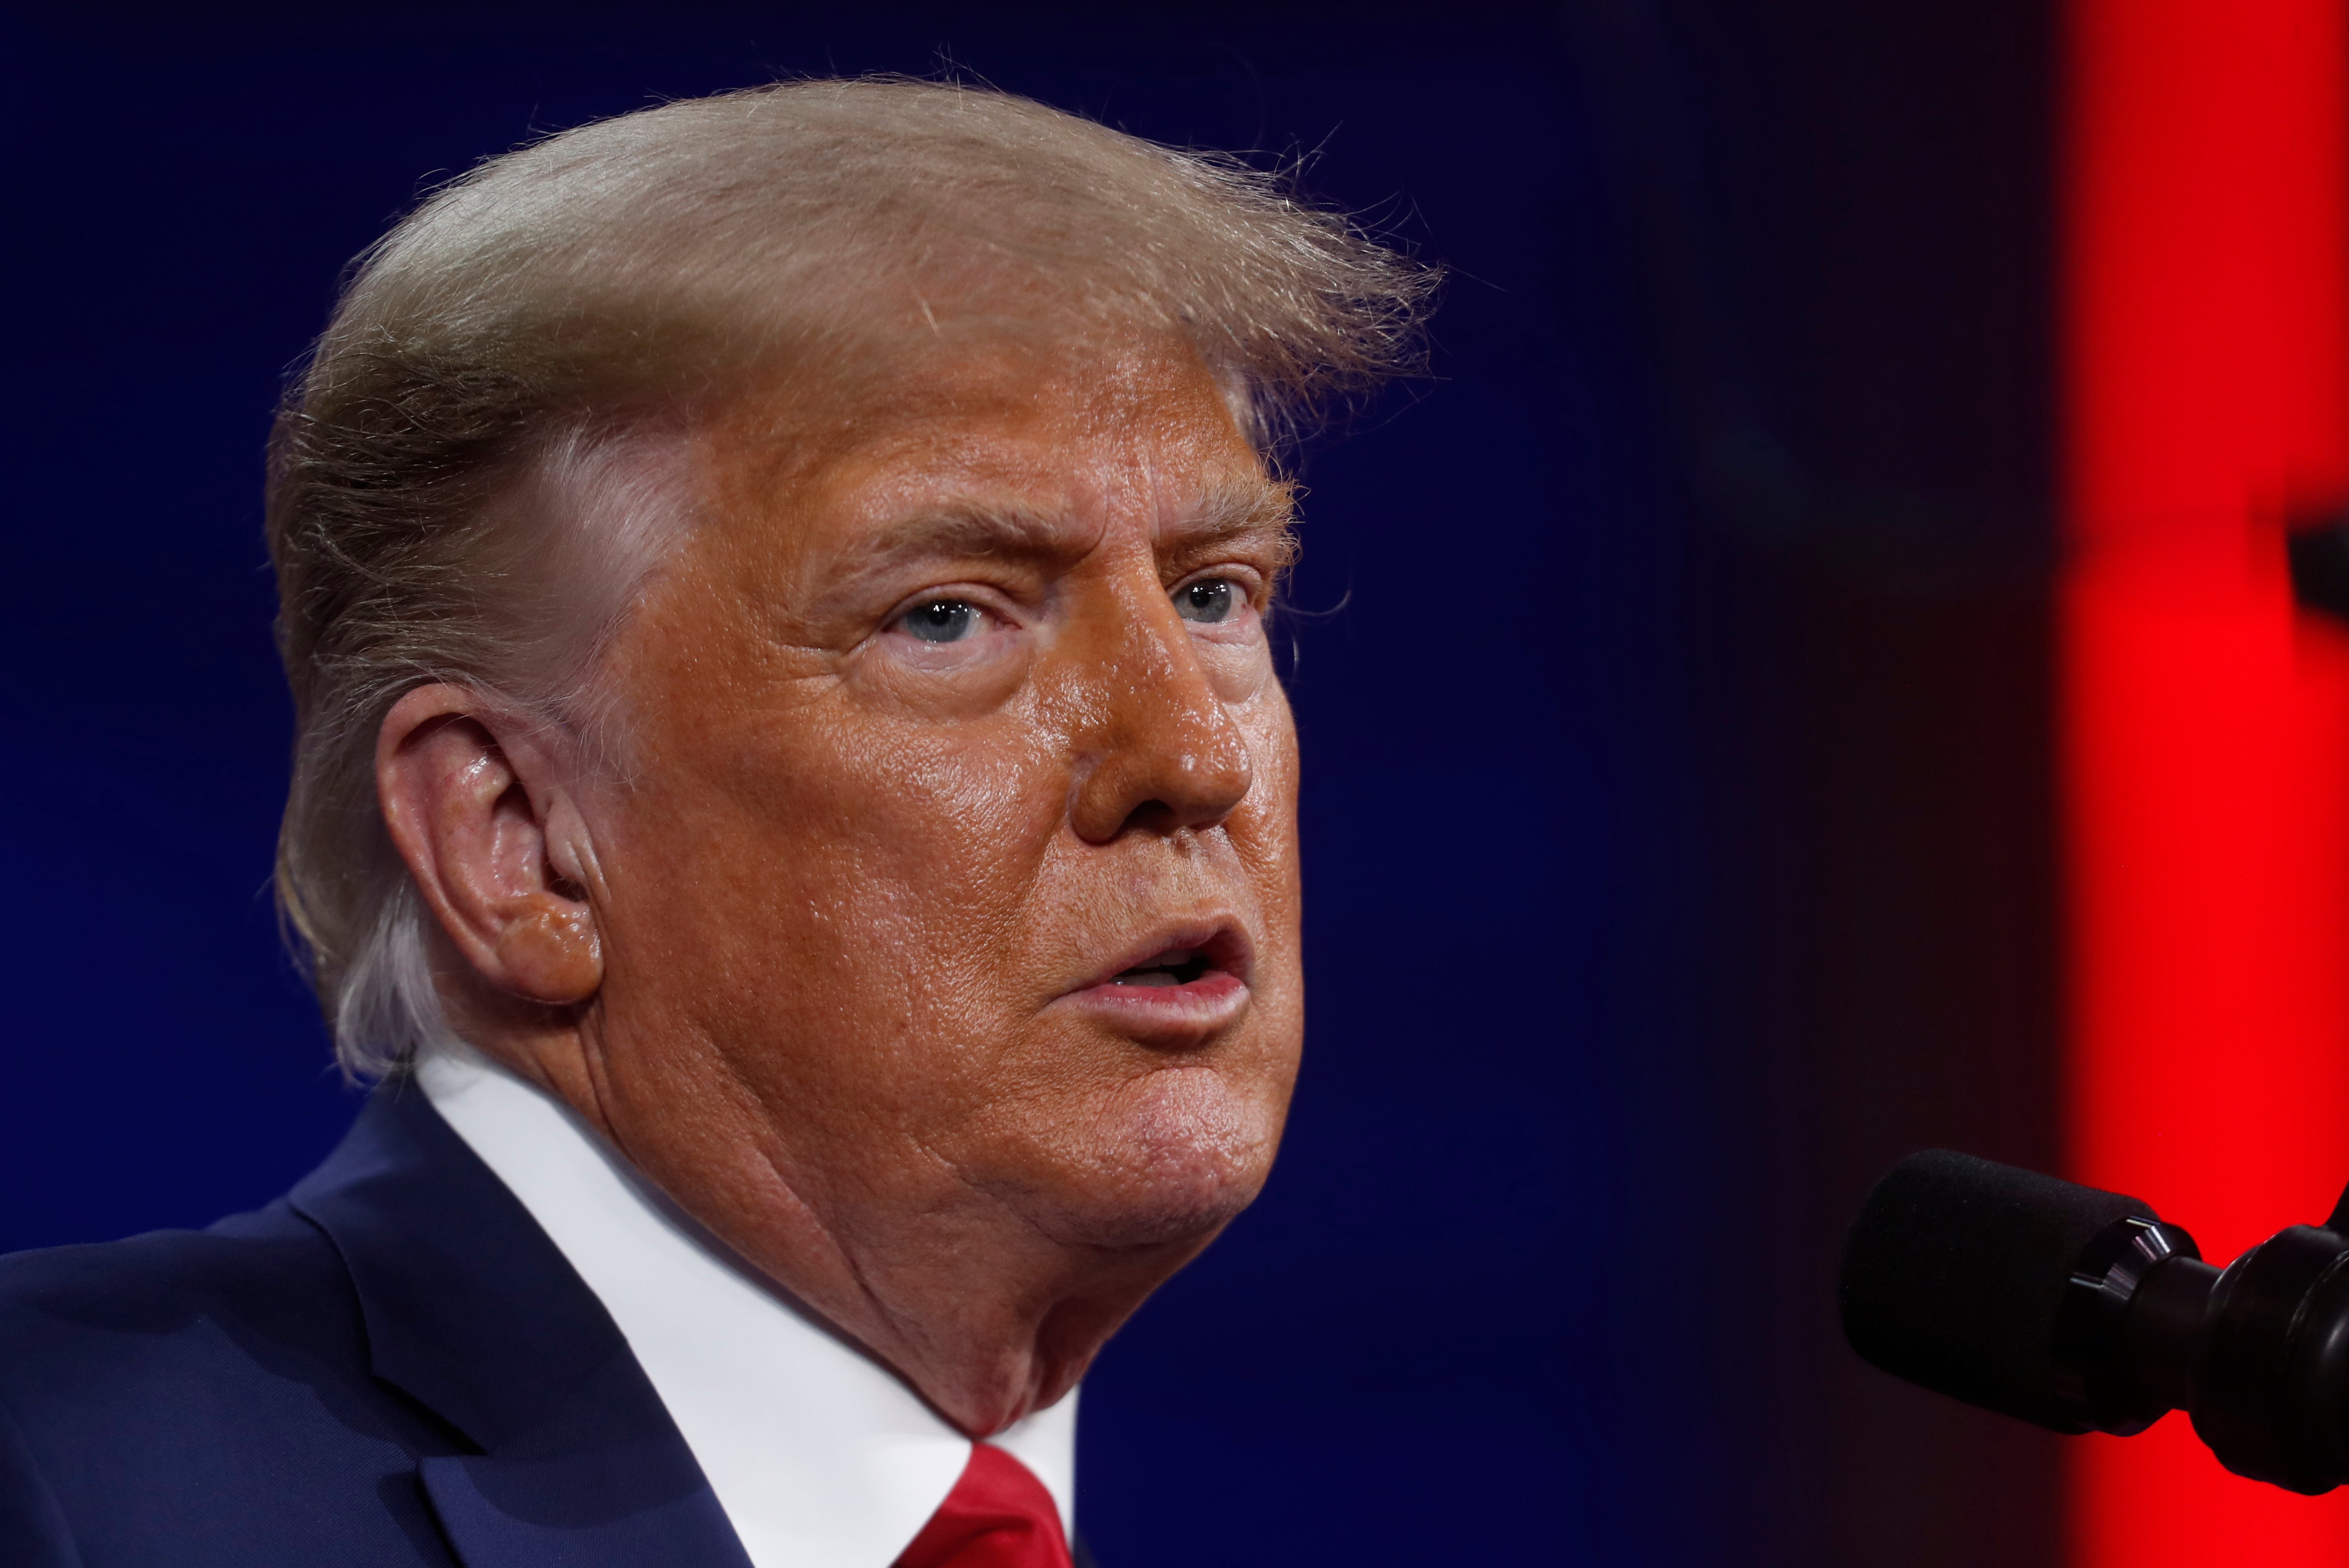 <p>Donald Trump speaks at the Conservative Political Action Conference in Orlando on 28 February, 2021</p>